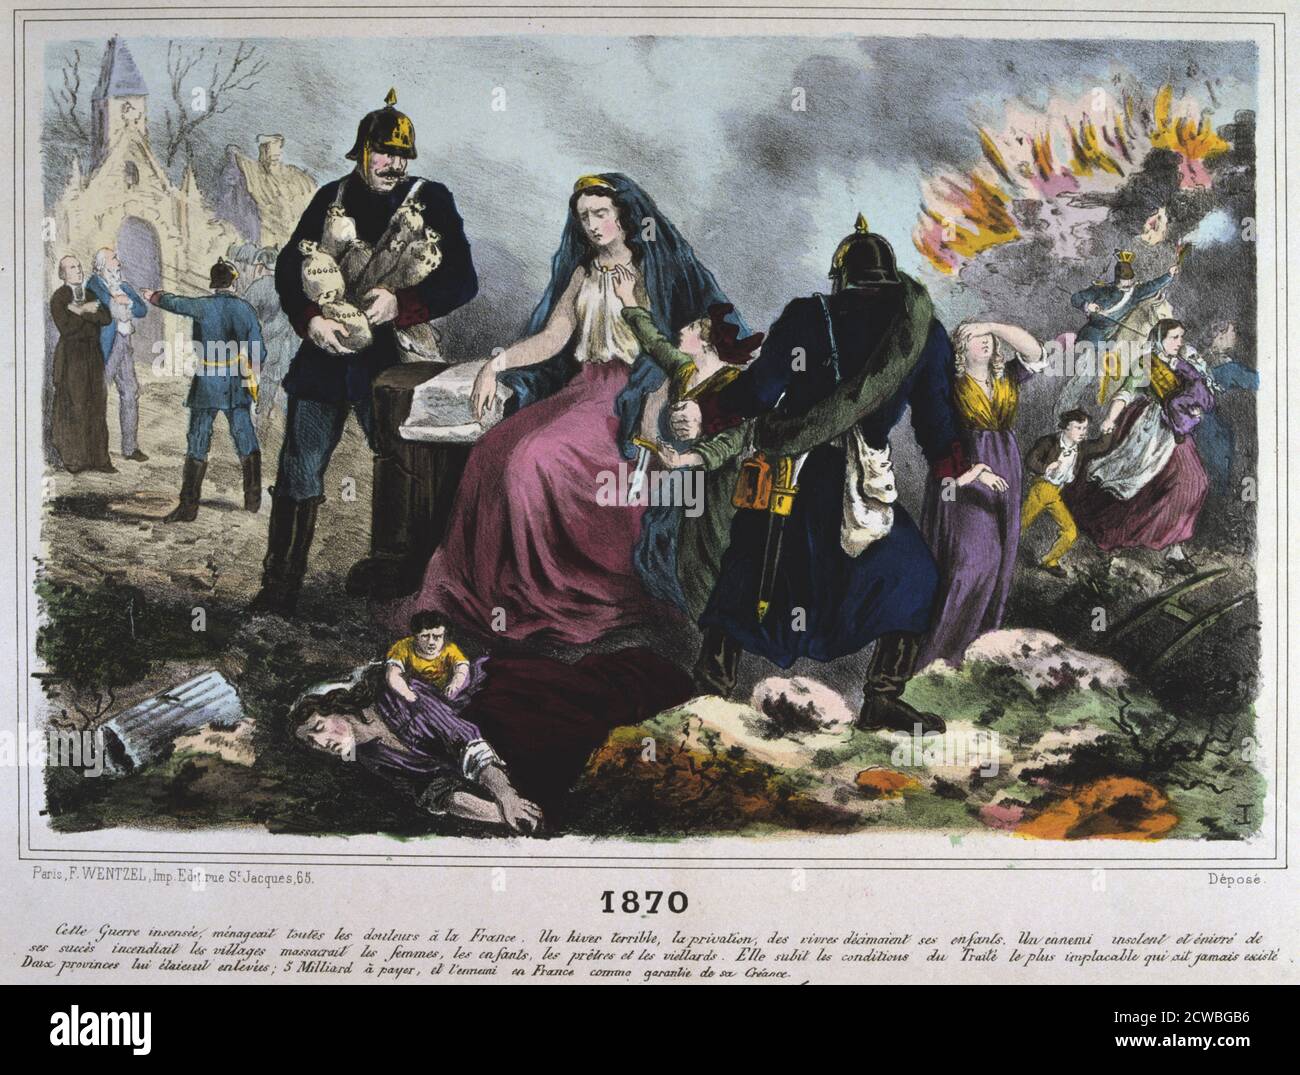 Allegory of France of 1870, Franco-Prussian war, 1870-1871. France, seated and surrounded by the chaos and destruction of the Franco-Prussian War. From a private collection. Defeat in the conflict was a national humiliation for France and resulted in the end of the Second Empire. Stock Photo